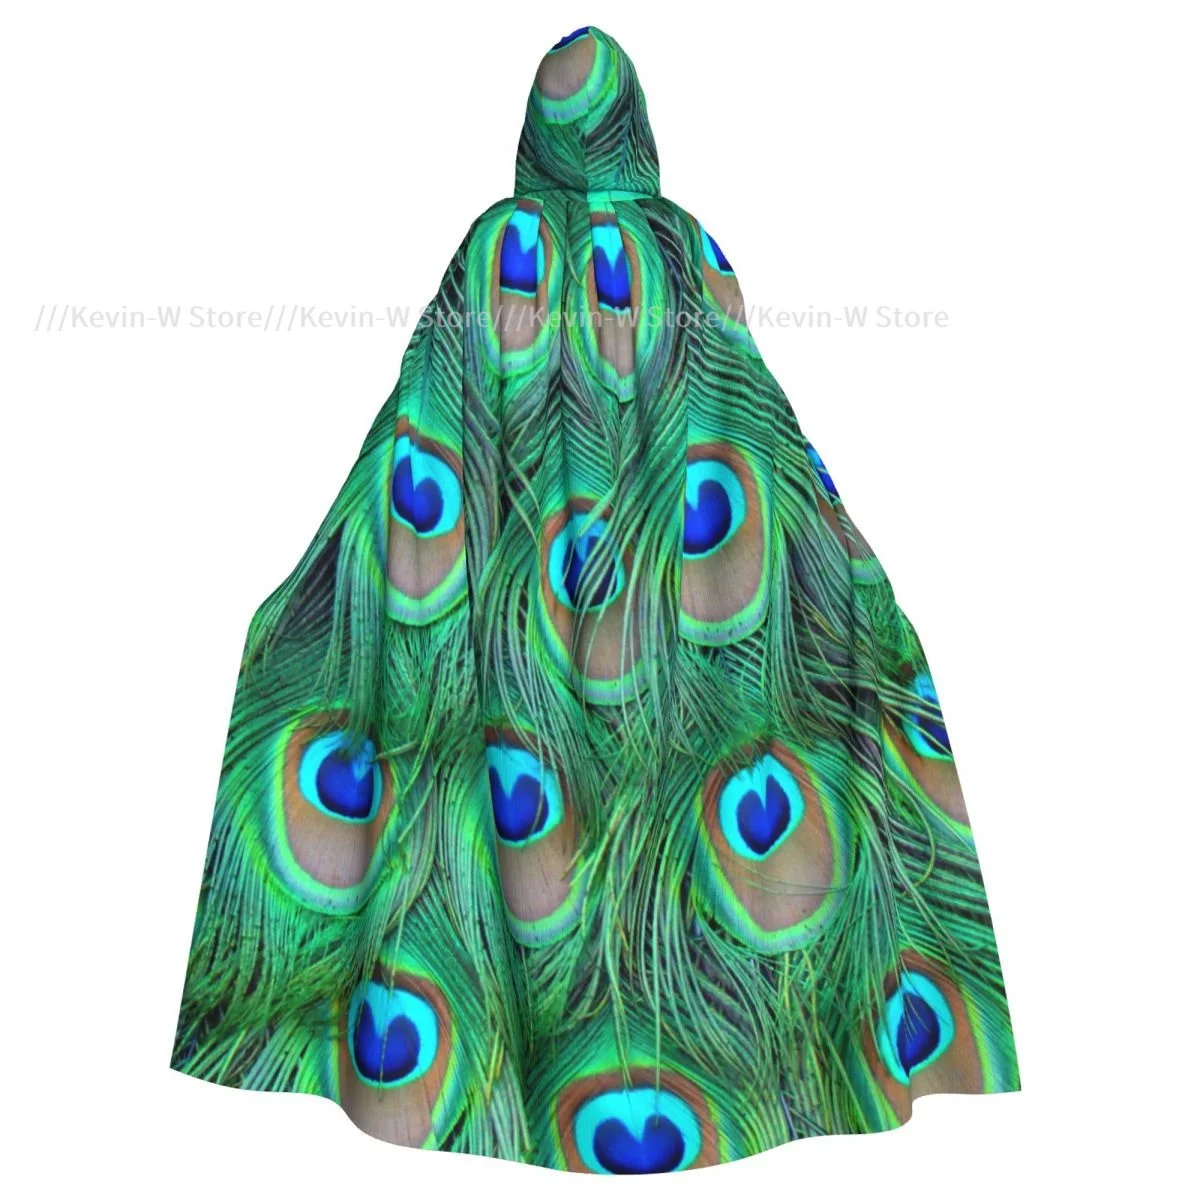 

Hooded Cloak Unisex Cloak with Hood Peacock Feather Print Cloak Vampire Witch Cape Cosplay Costume